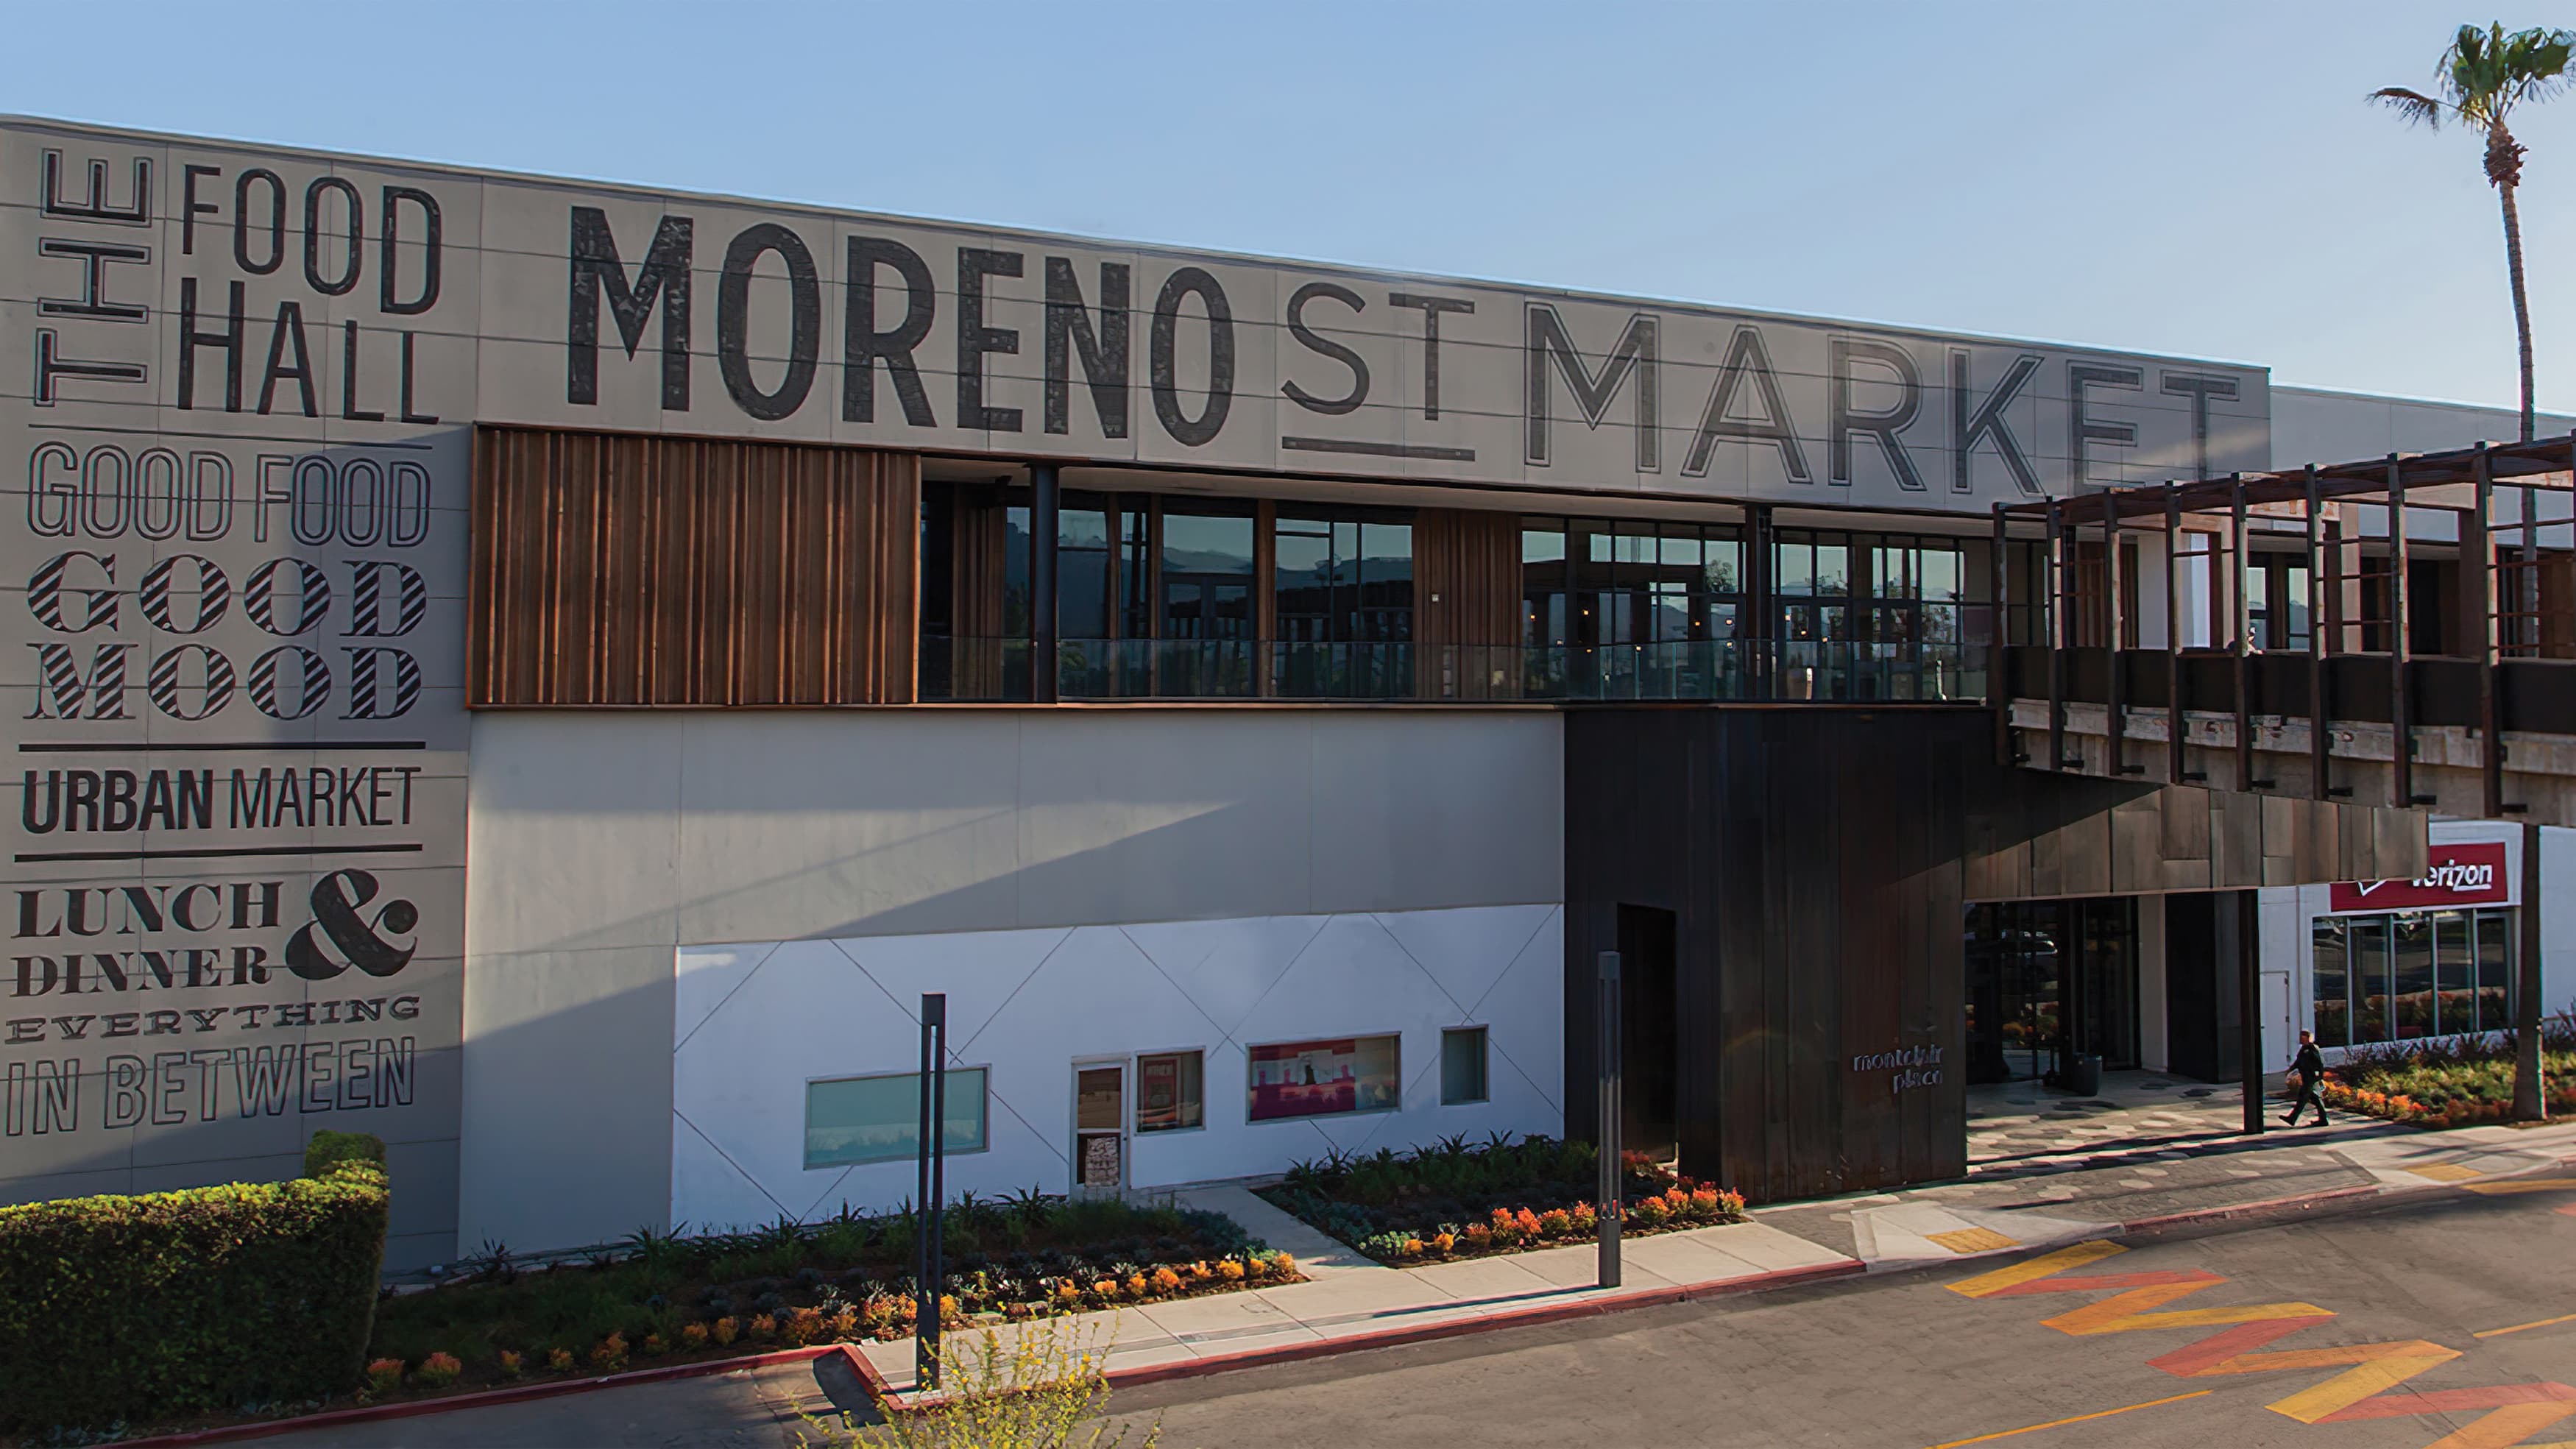 Moreno Street Market building with architectural graphics and specialty crosswalk